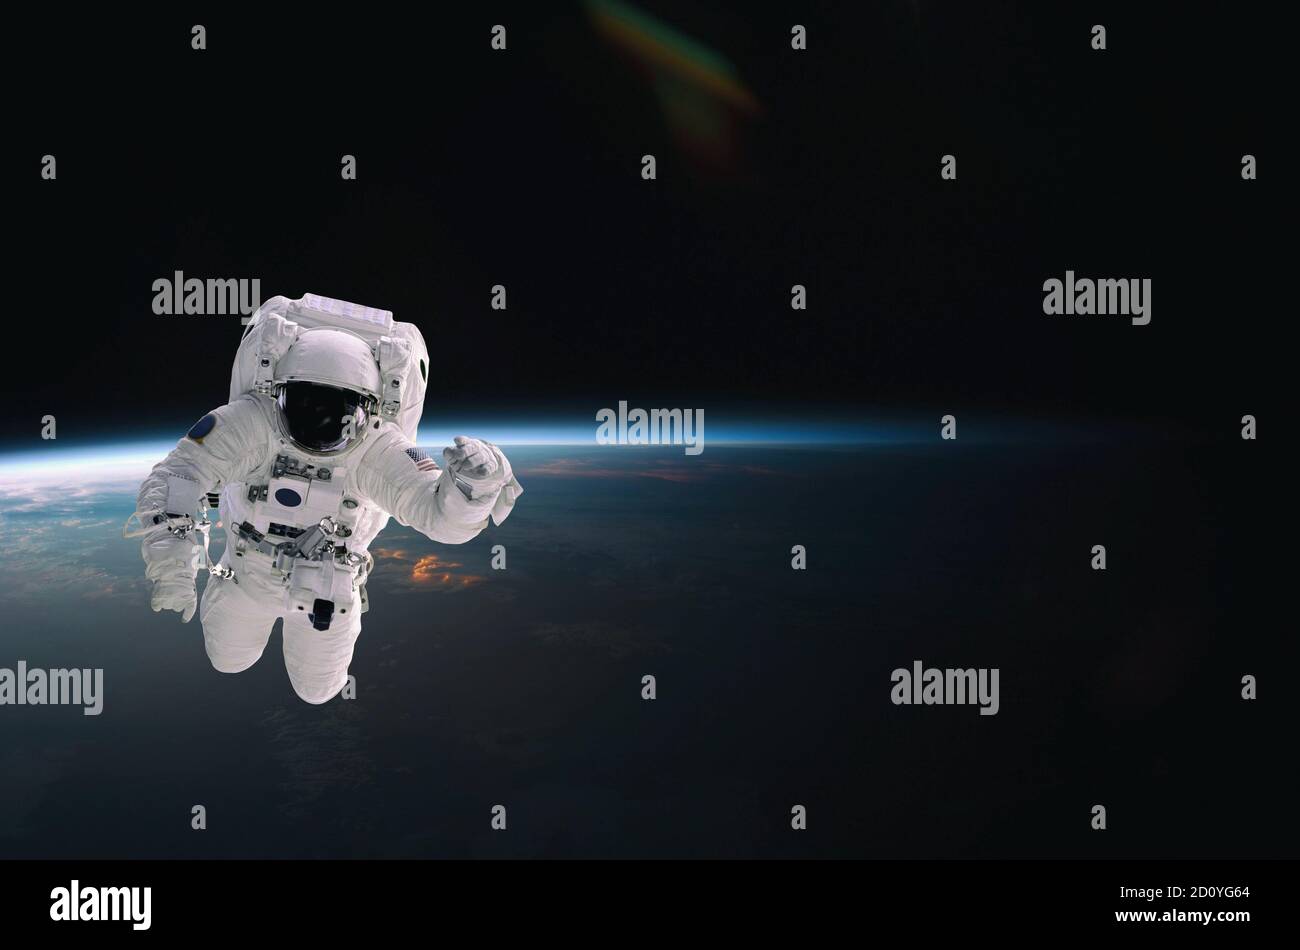 Astronaut walking in space with earth background, with flare. Elements of this image furnished by NASA. Stock Photo